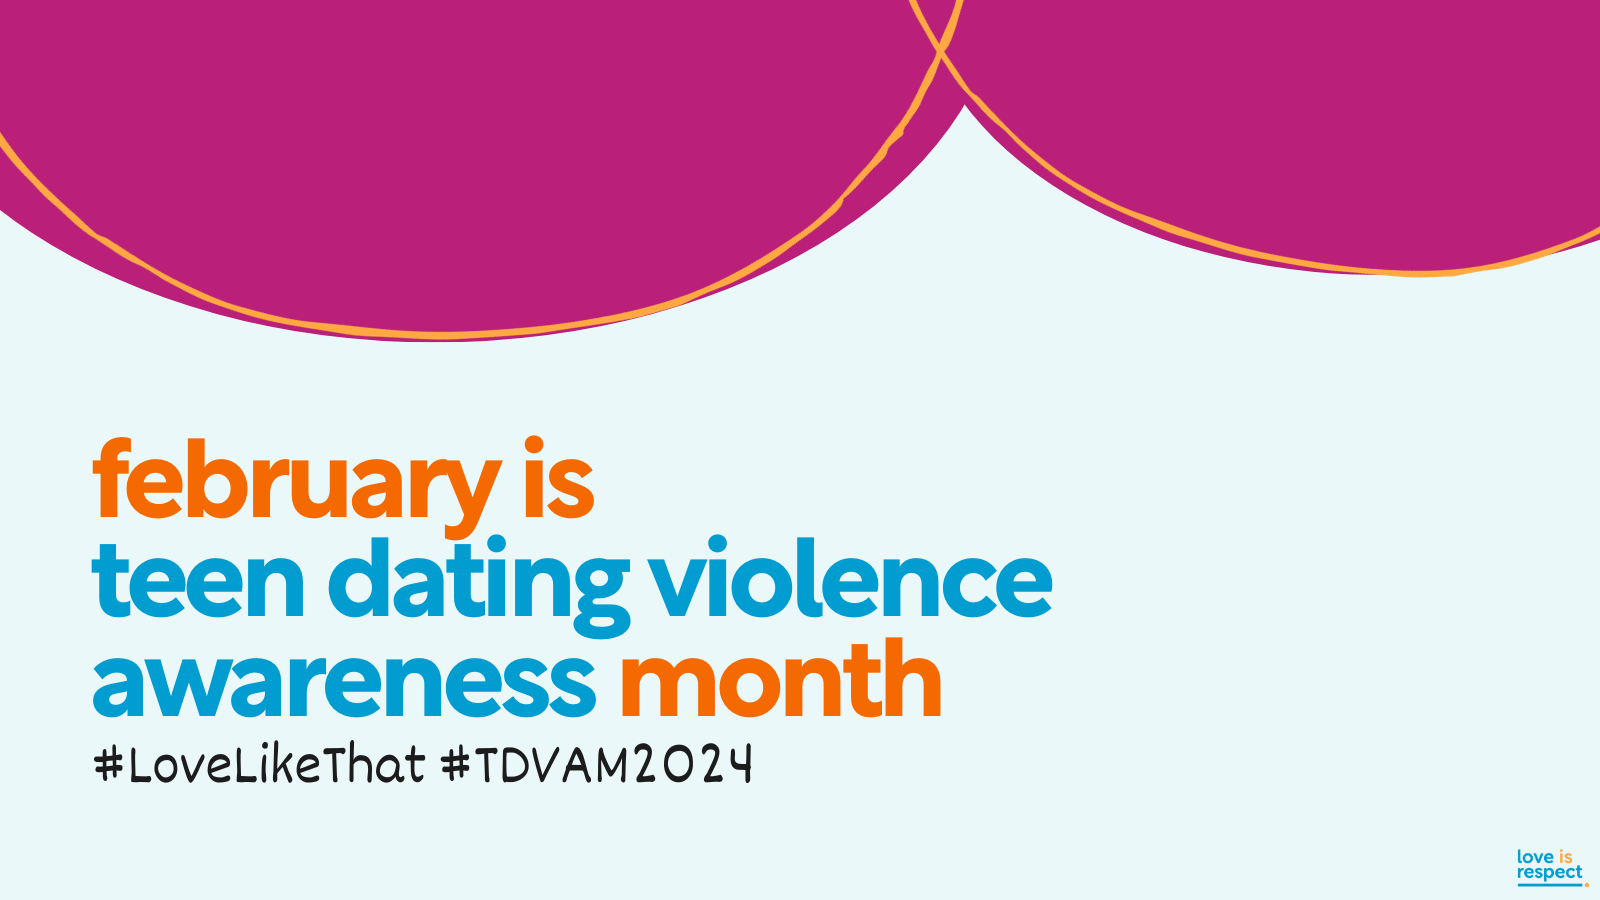 Teen Dating Violence Awareness Month in February